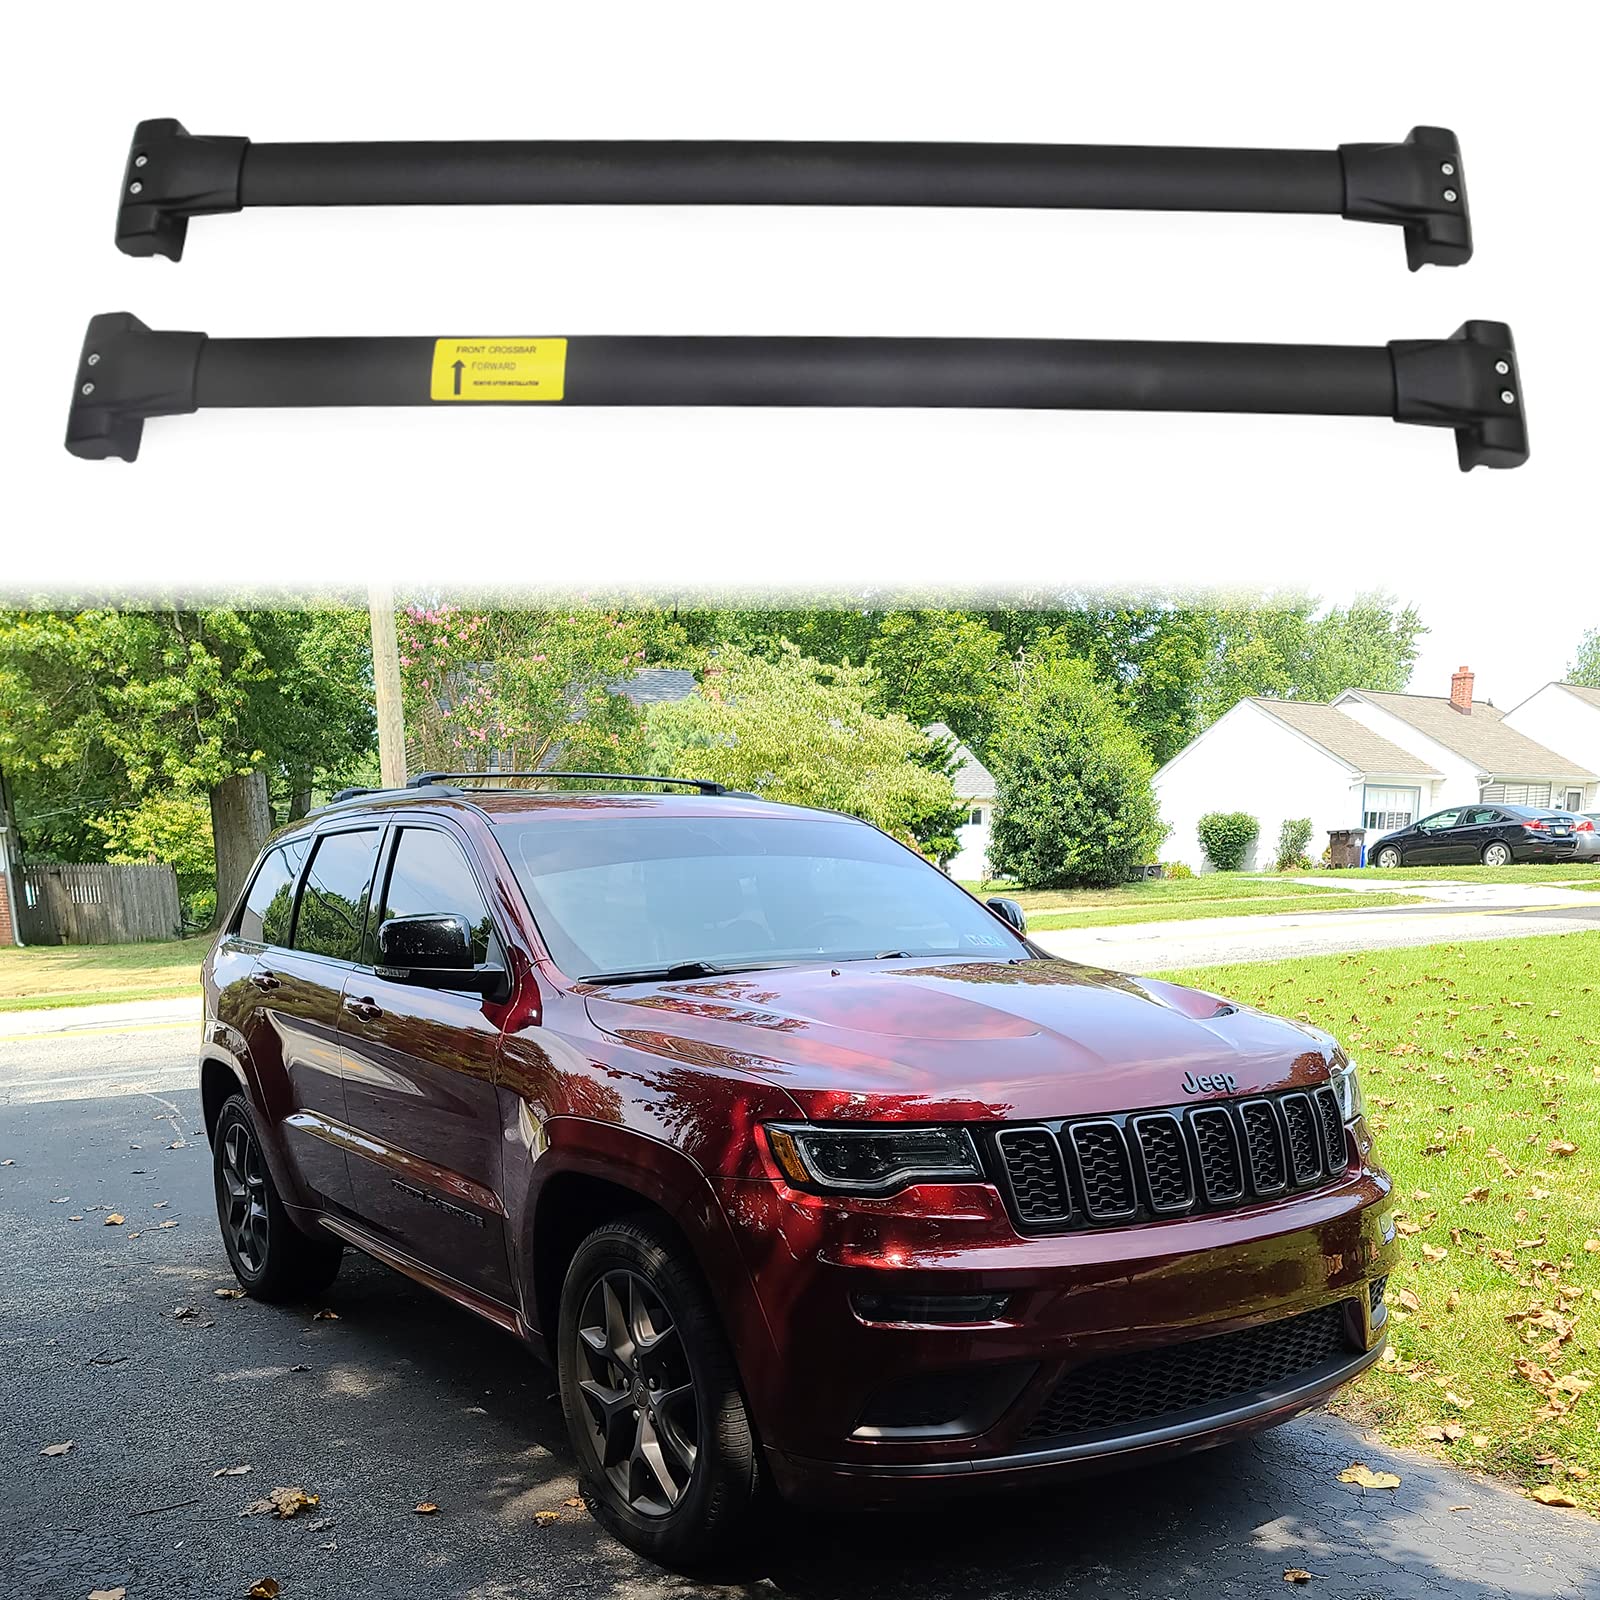 Snailfly Black Crossbars Fit for 2011-2021 Jeep Grand Cherokee Cross Bars  Roof Rack Luggage Holder